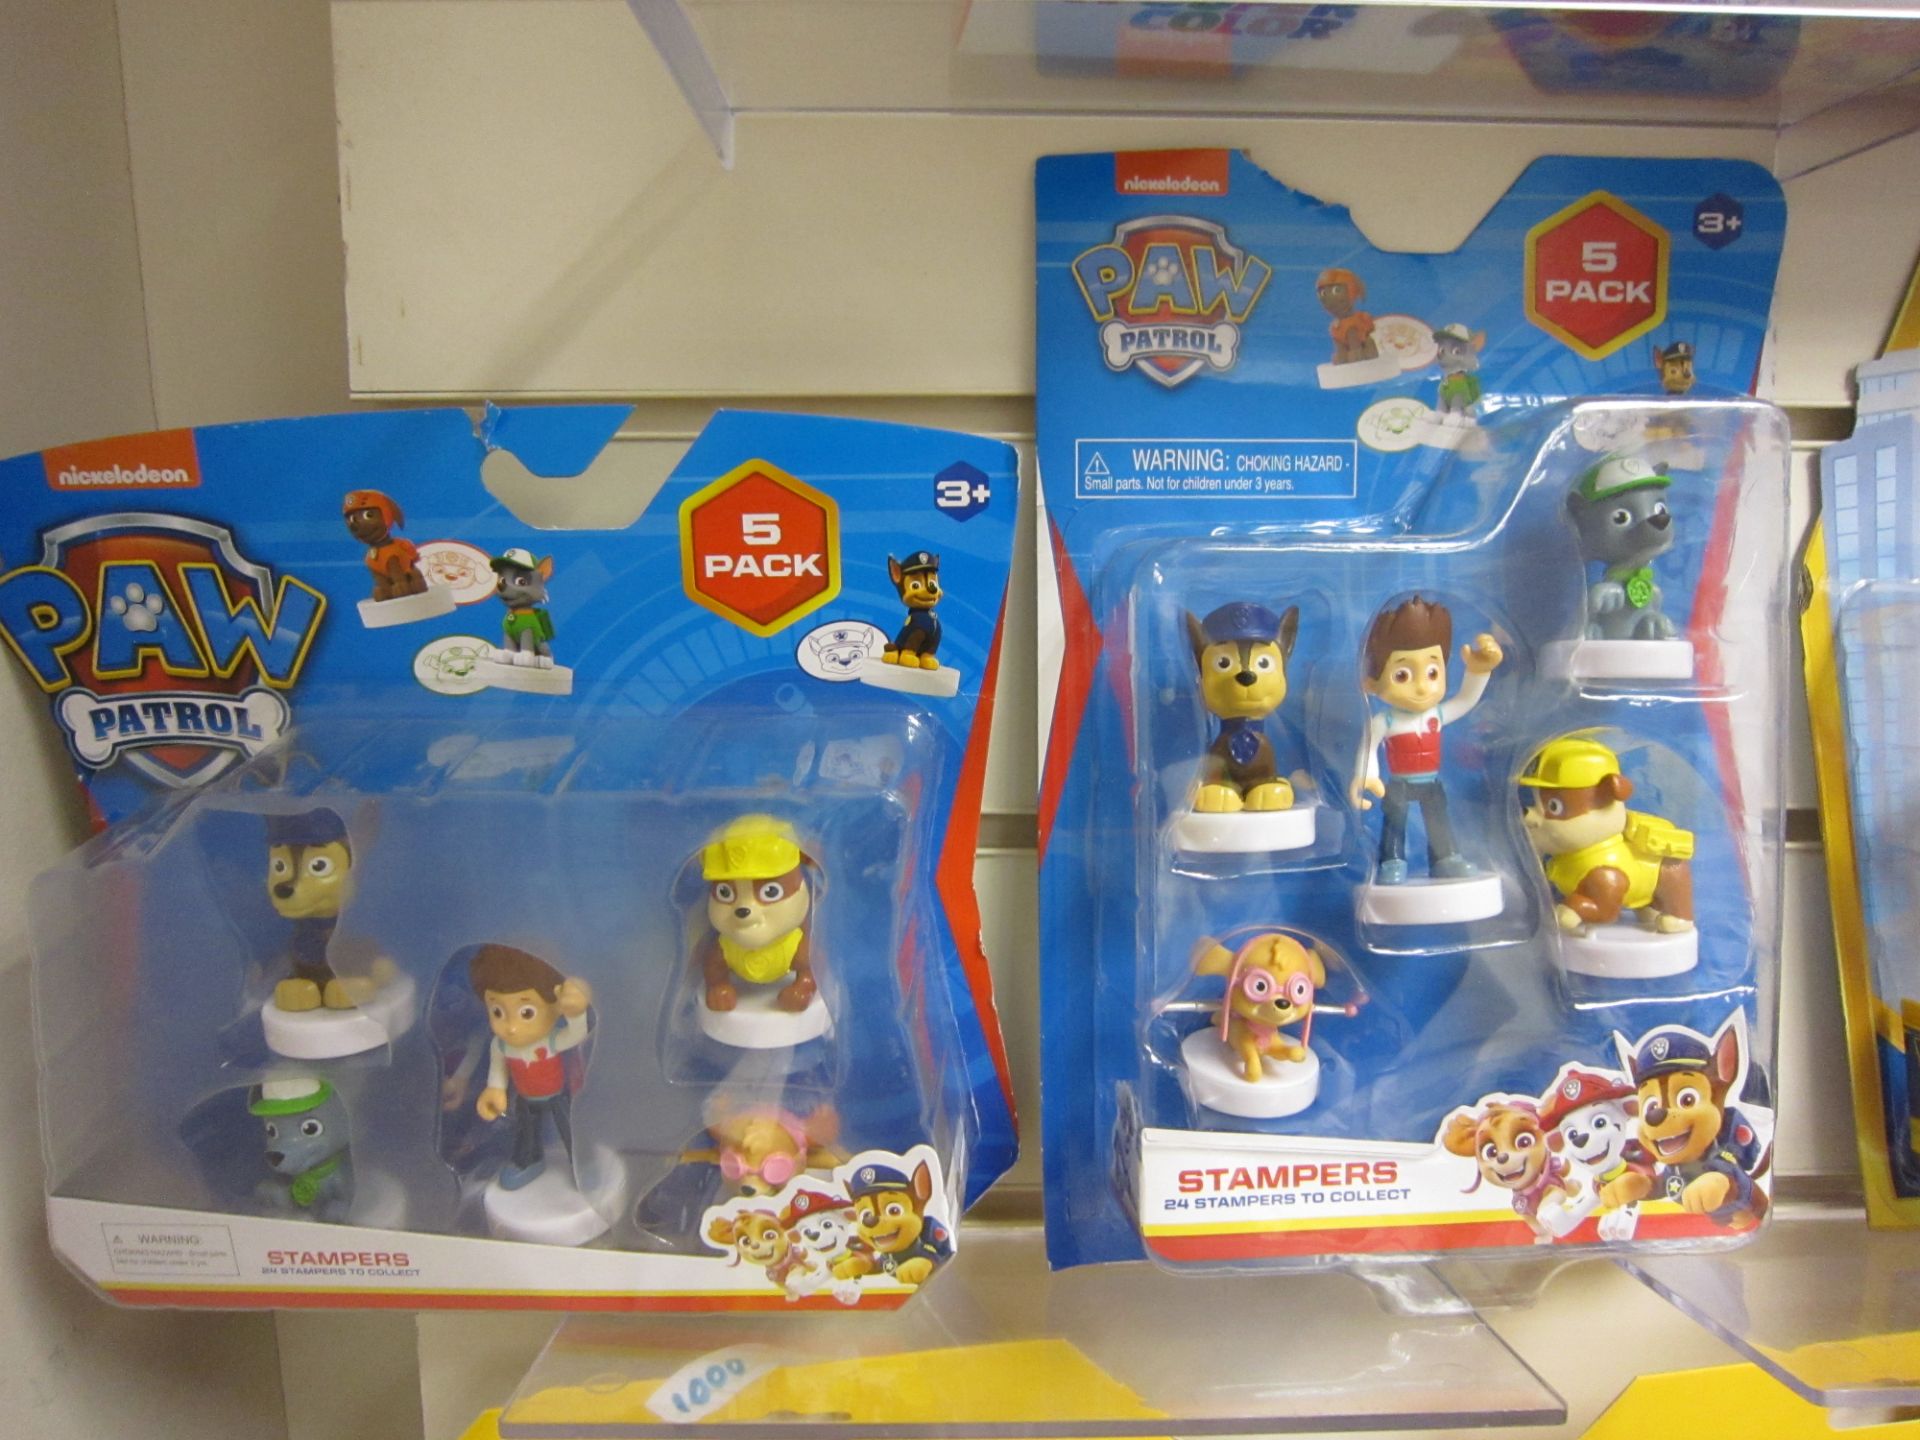 500 Assorted Paw Patrol Stampers / Toppers Sets All Brand New Sealed, Assorted Varieties All Br...